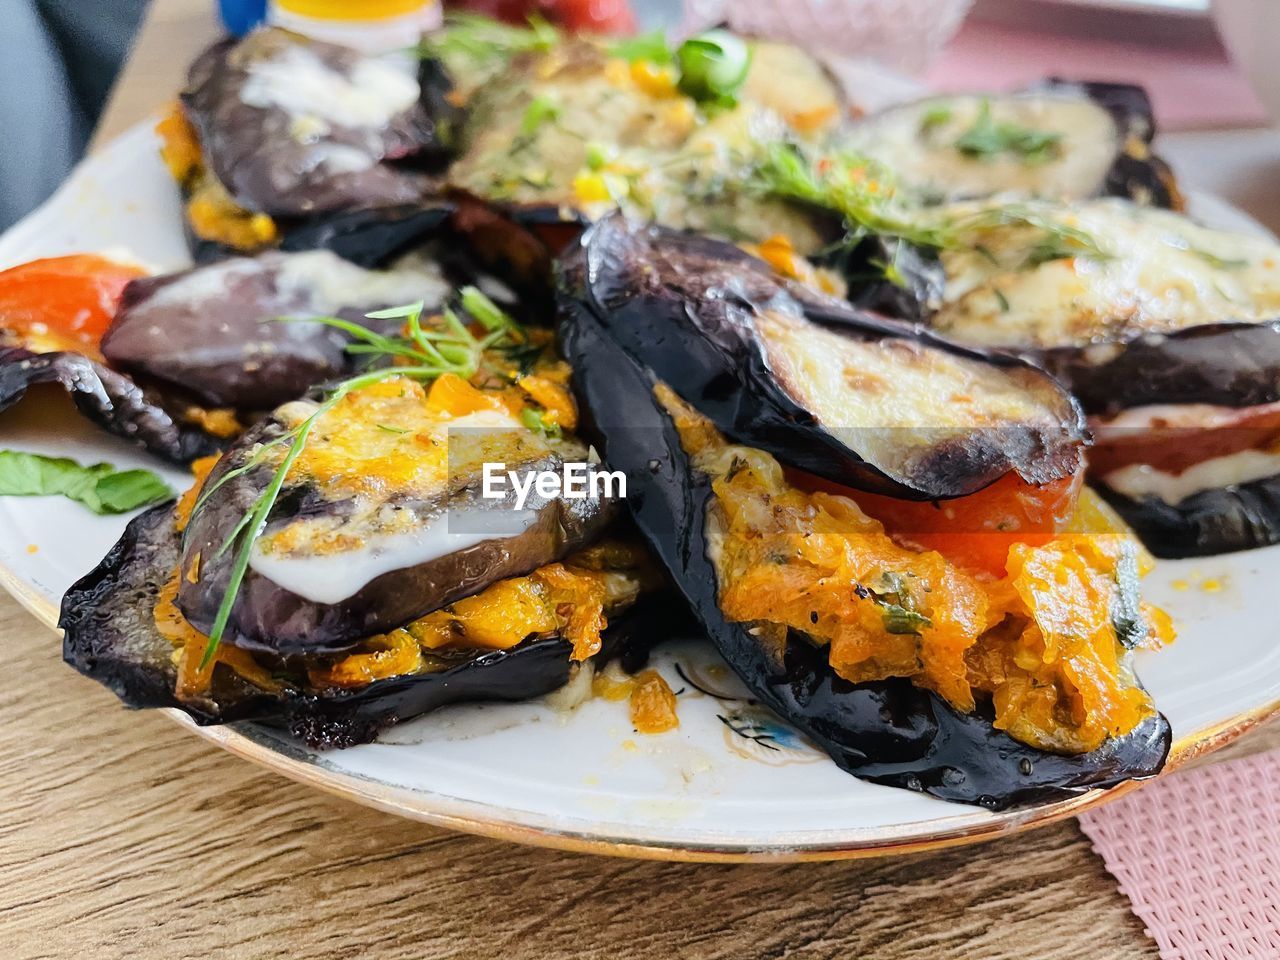 High angle view of baked eggplant with cheese in plate on table